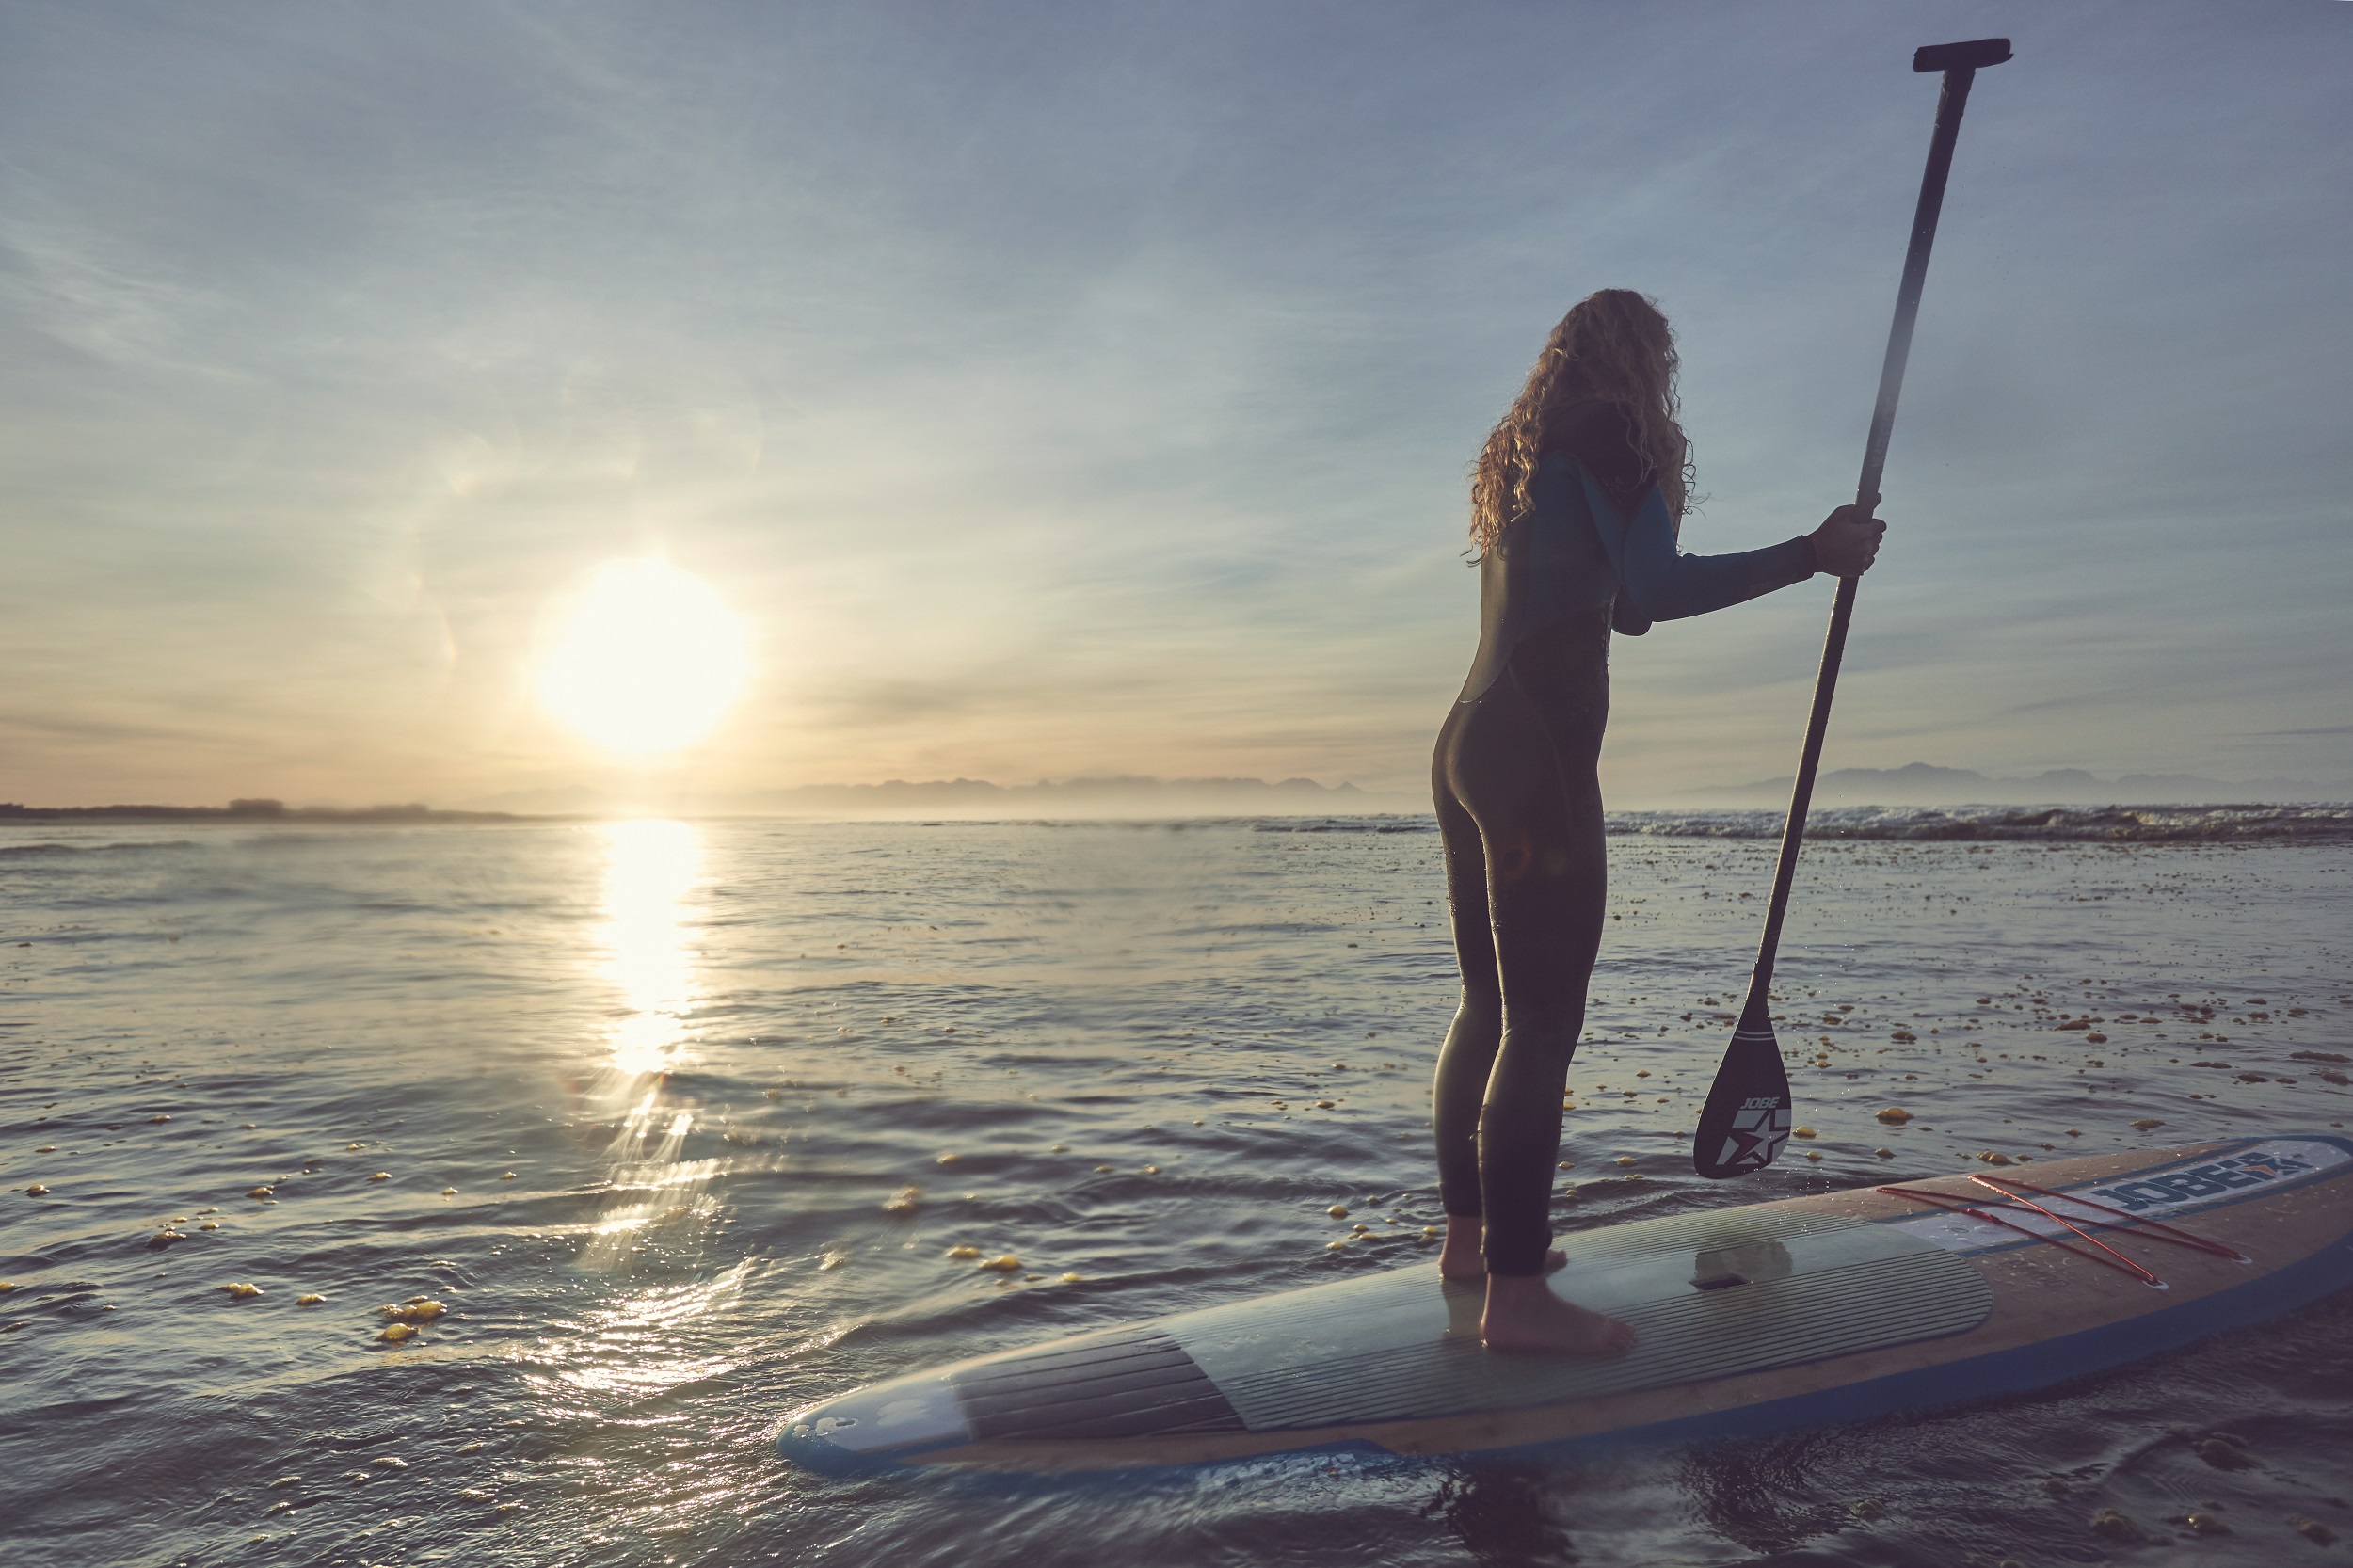 Time to pack your SUP for your next trip!